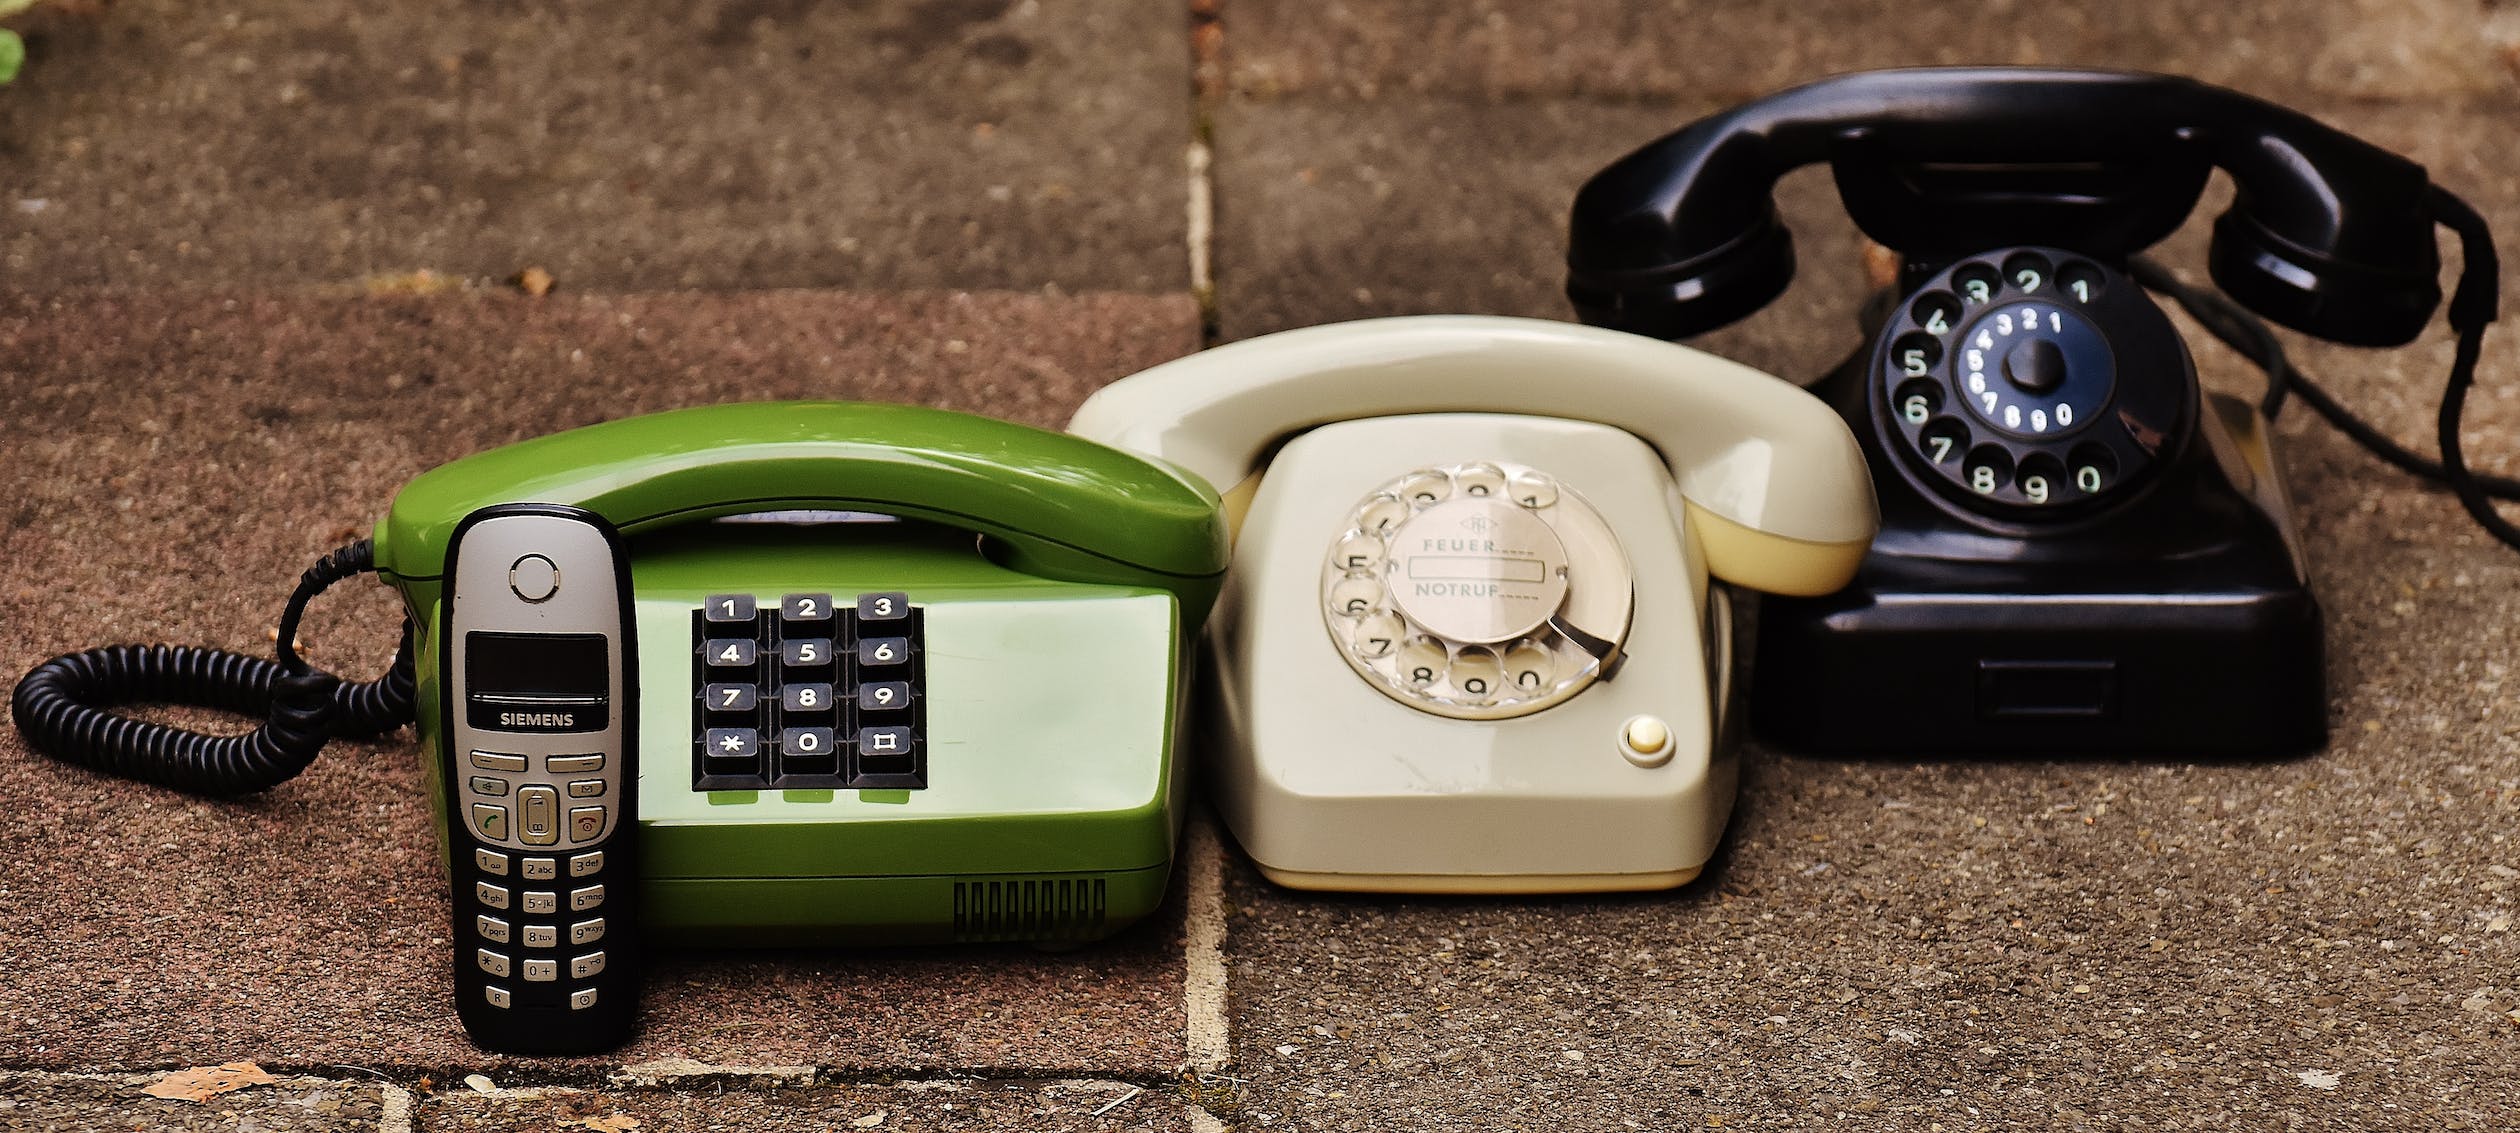 Image of an old candy-bar style phone, with several old-style landline phones.